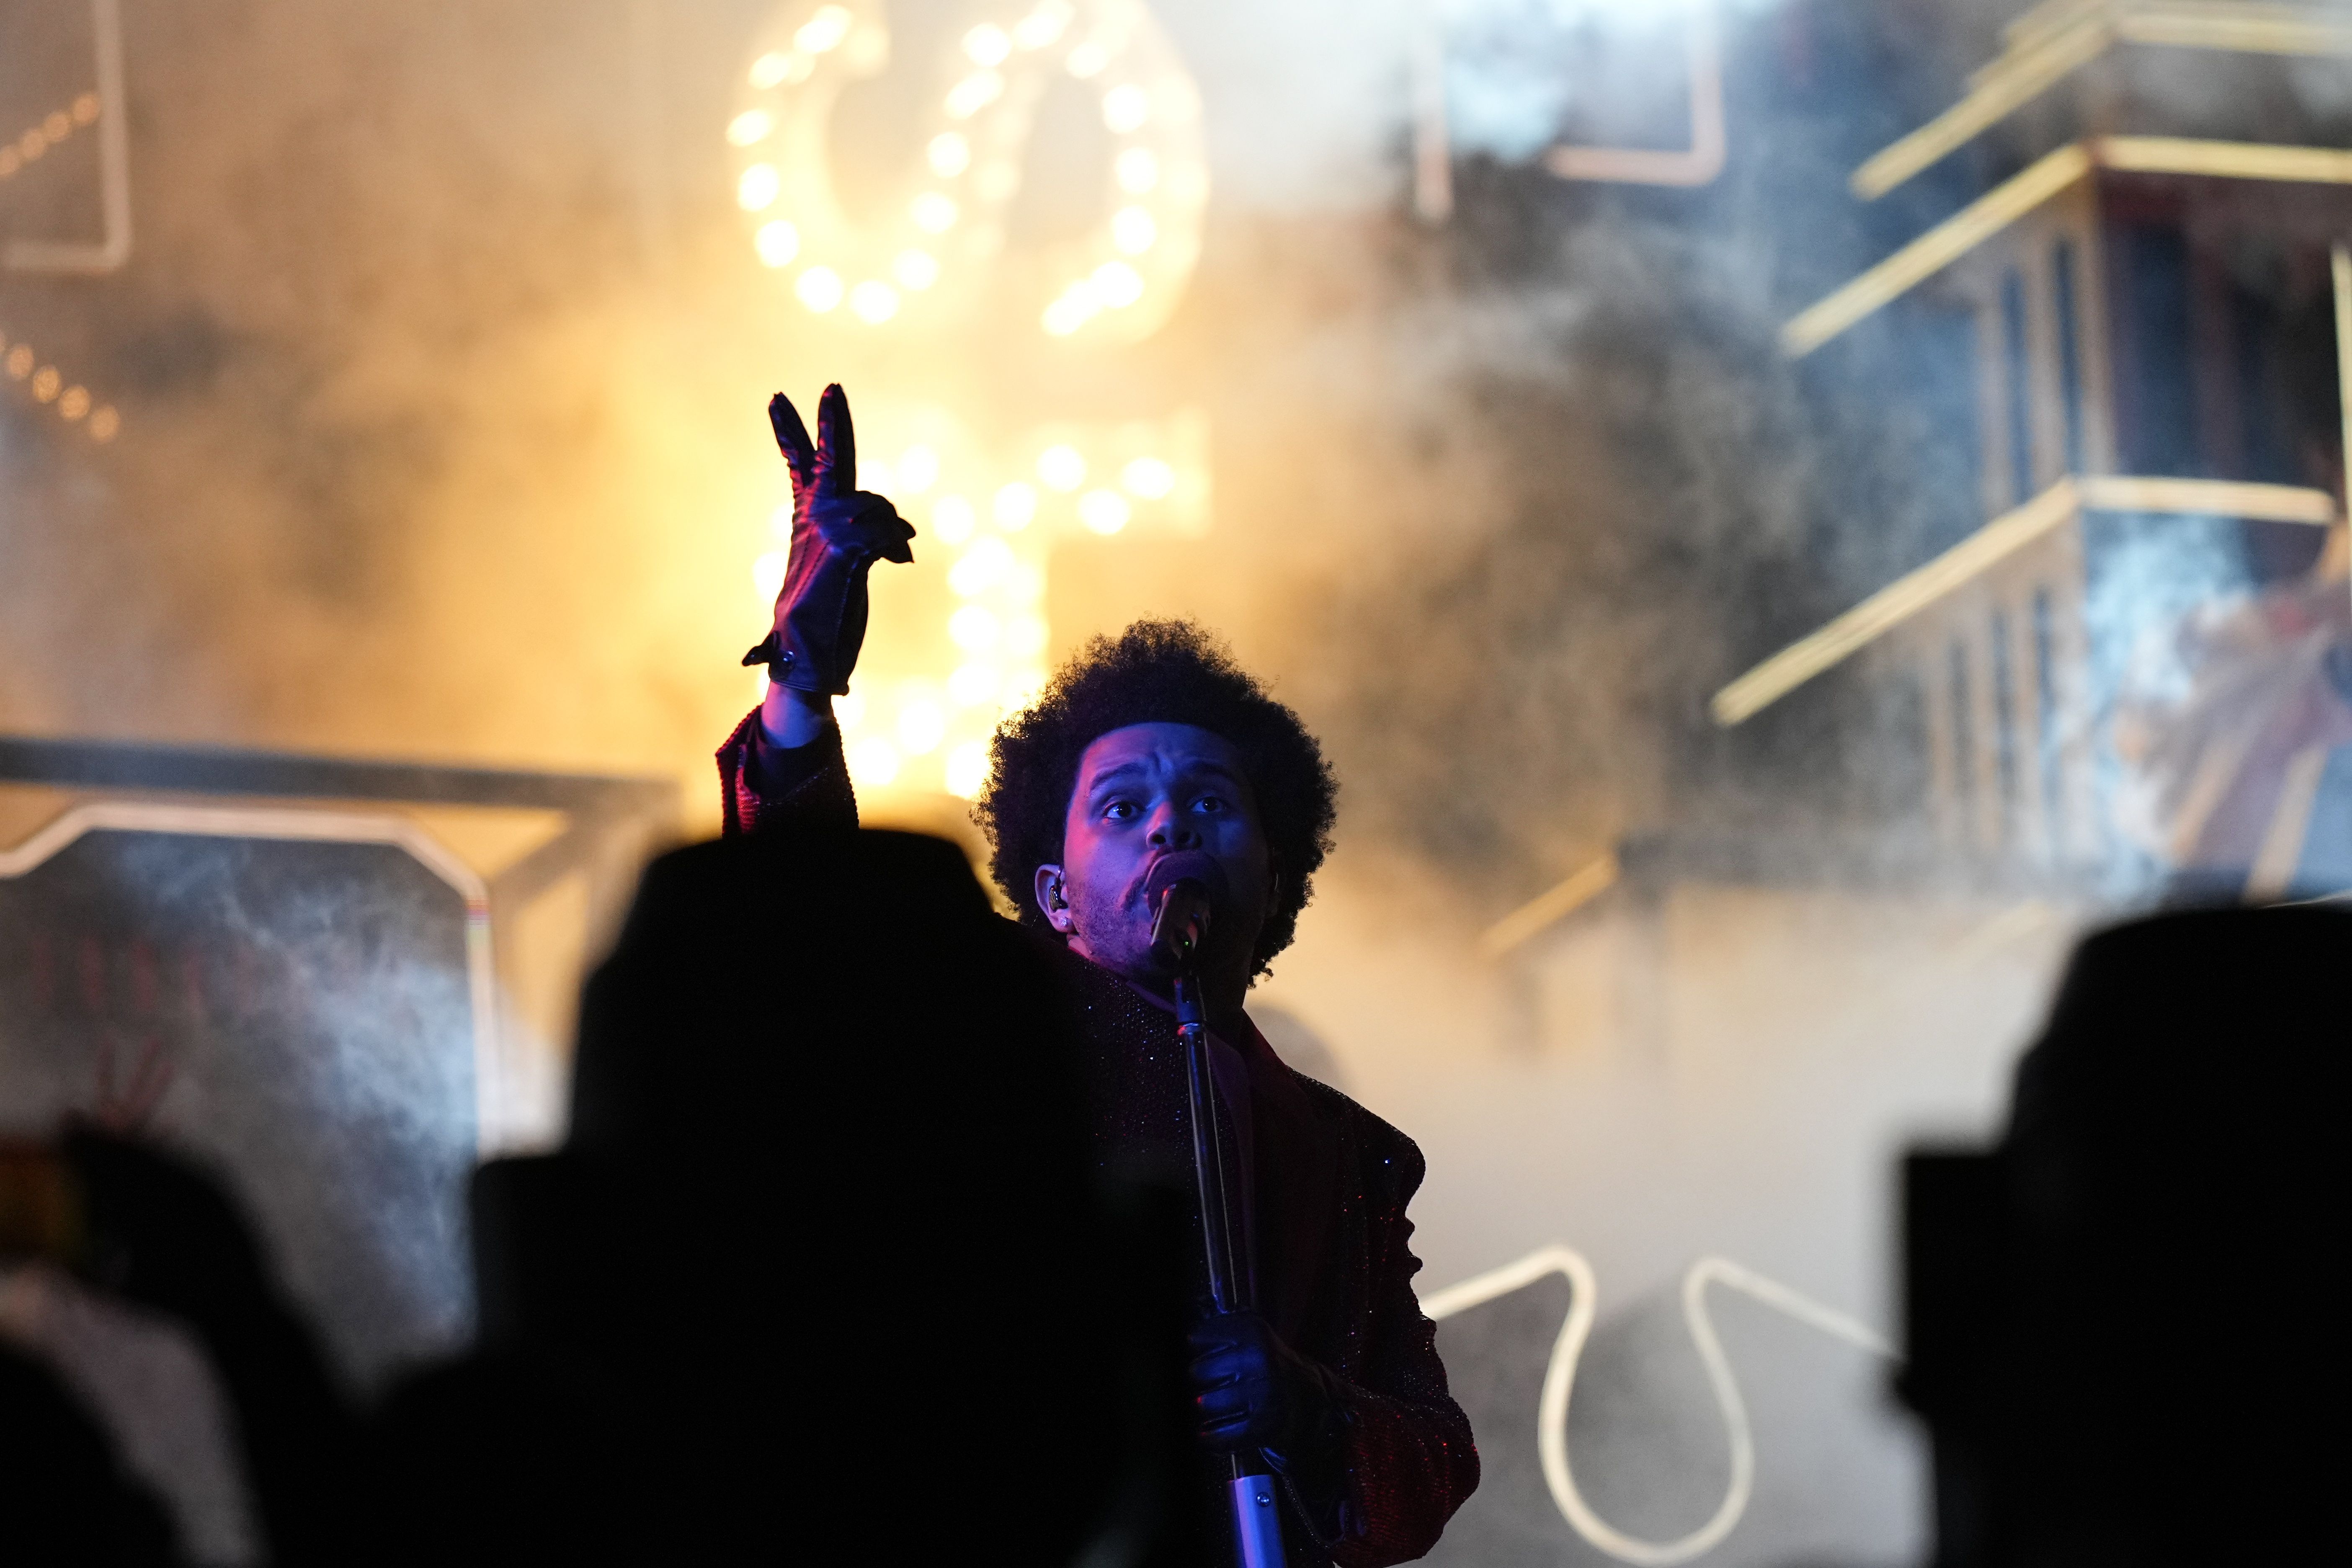 The Weeknd Tapped to Perform Super Bowl Halftime Show